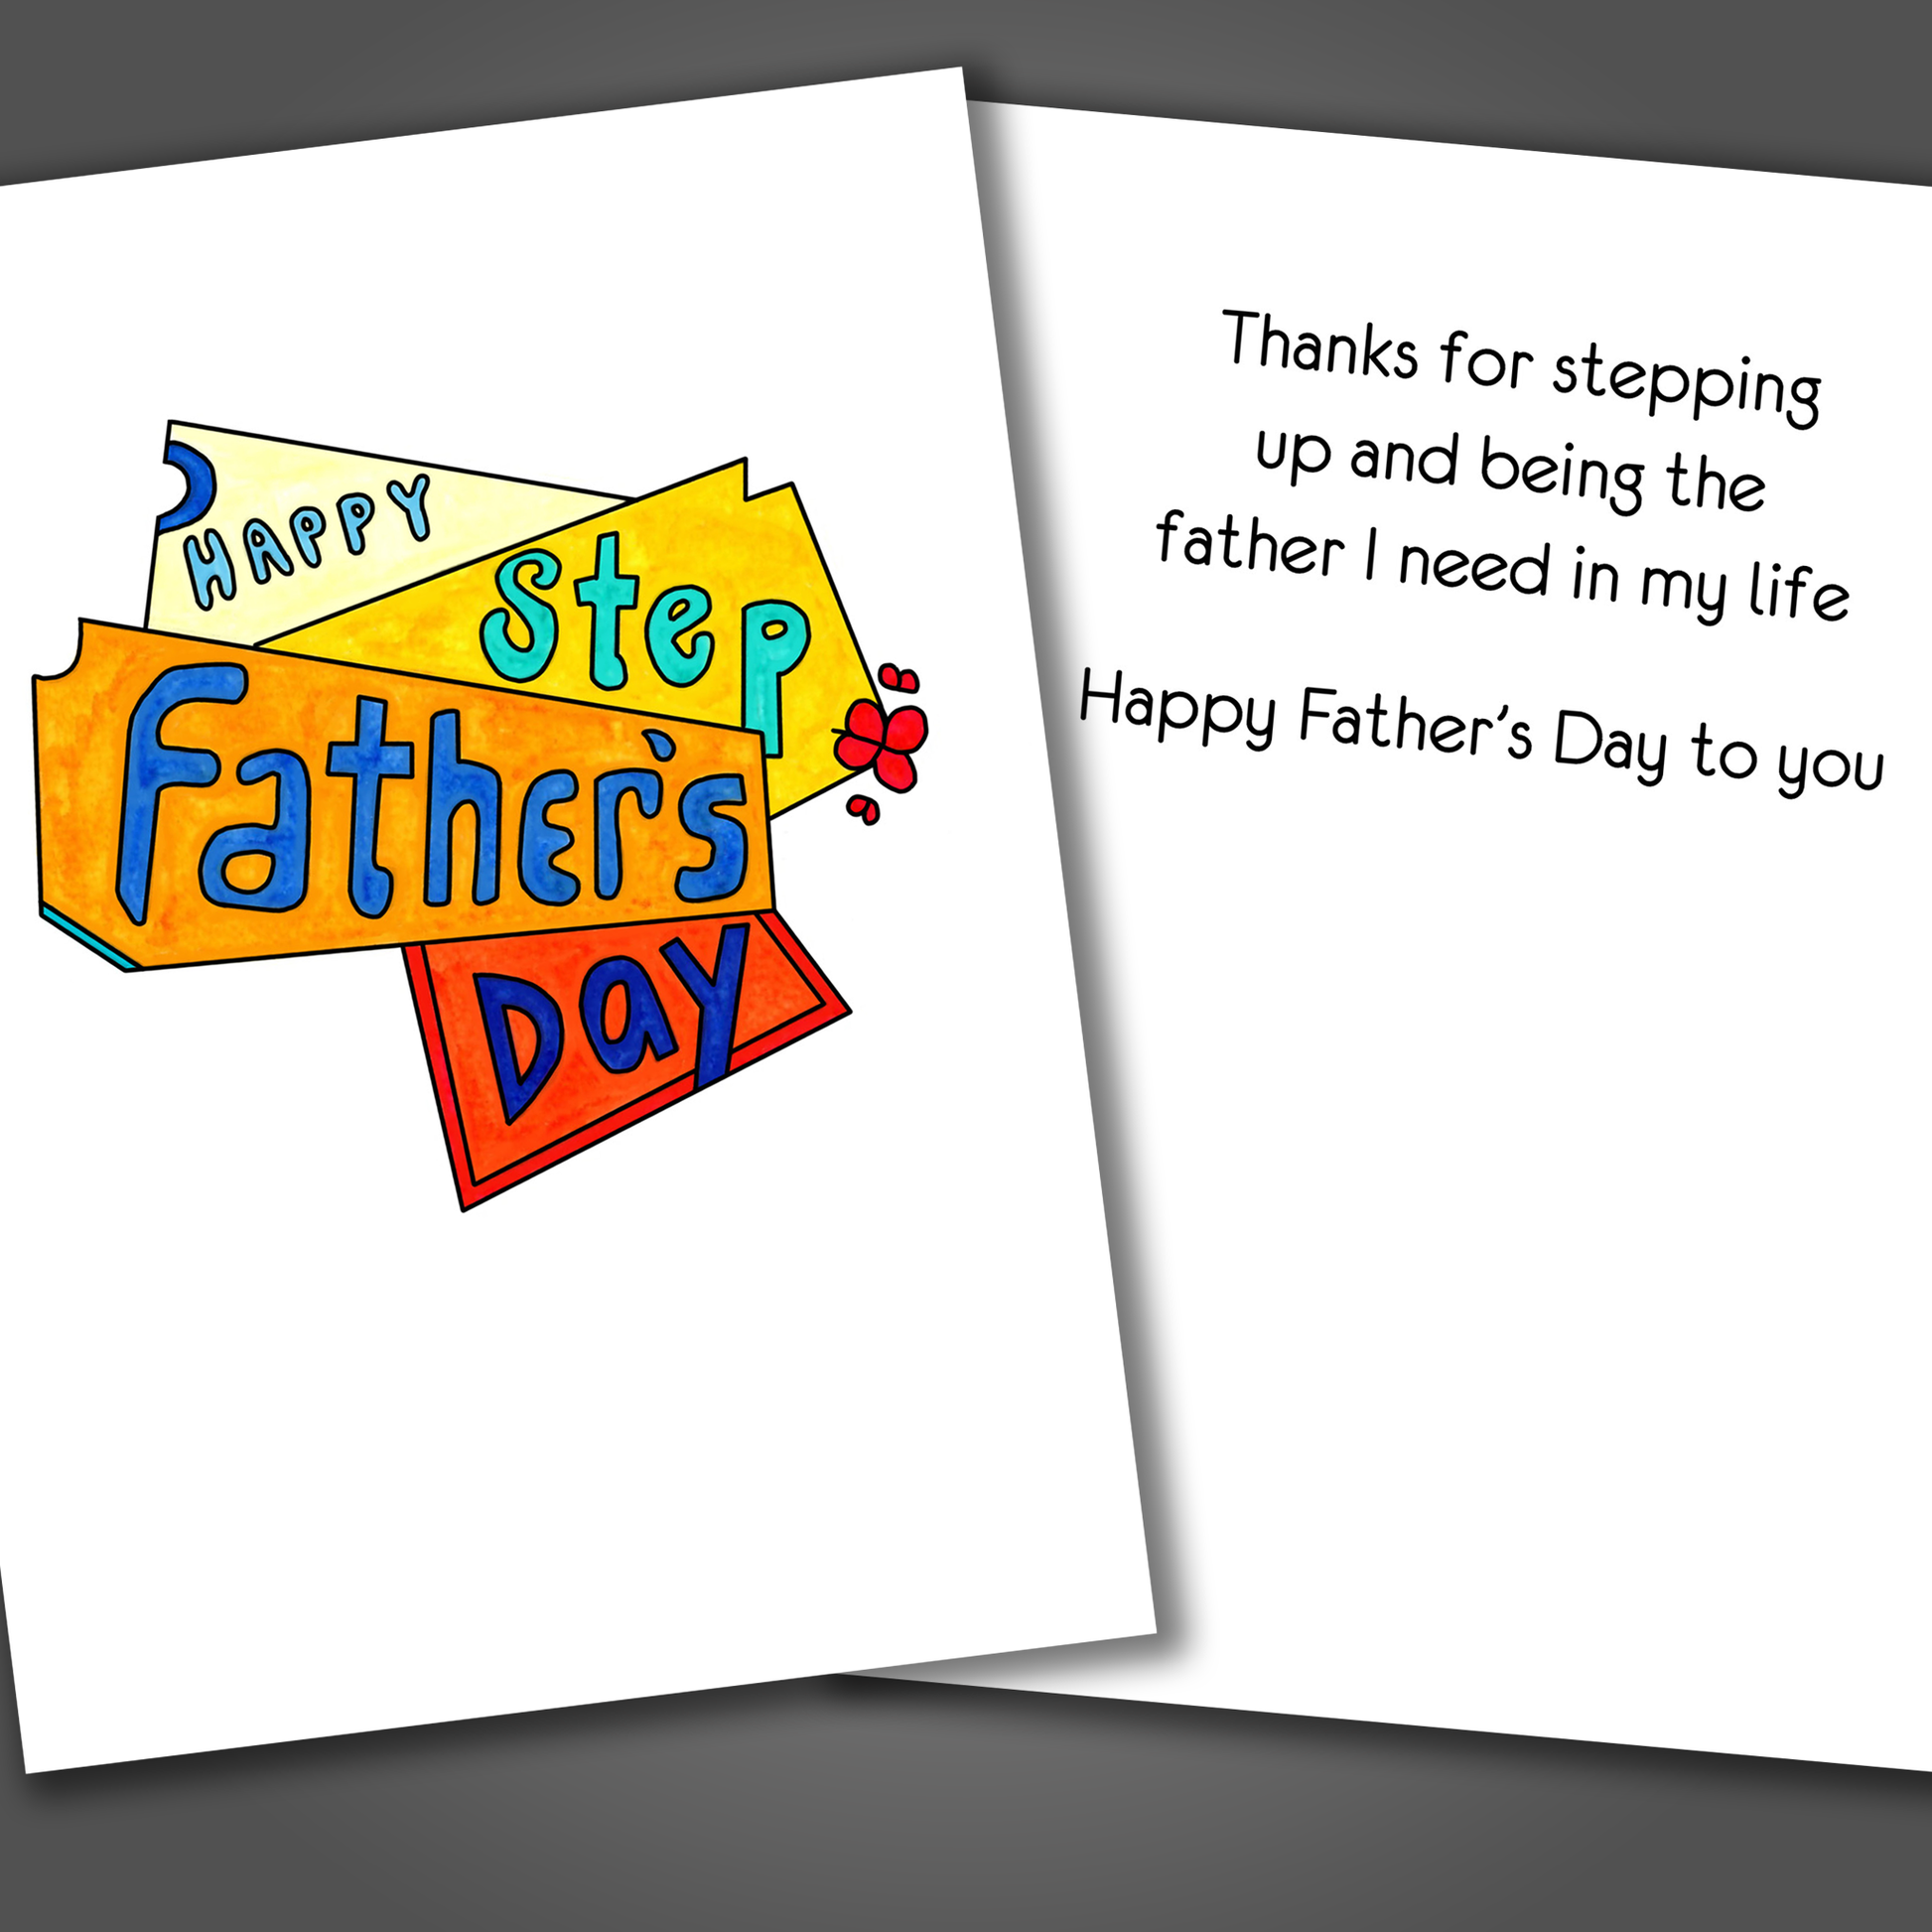 Funny happy step father's day card with the the phrase drawn in blue and red on the front of the card. Inside the card is a note that praises the step father for being the dad the giver never had.